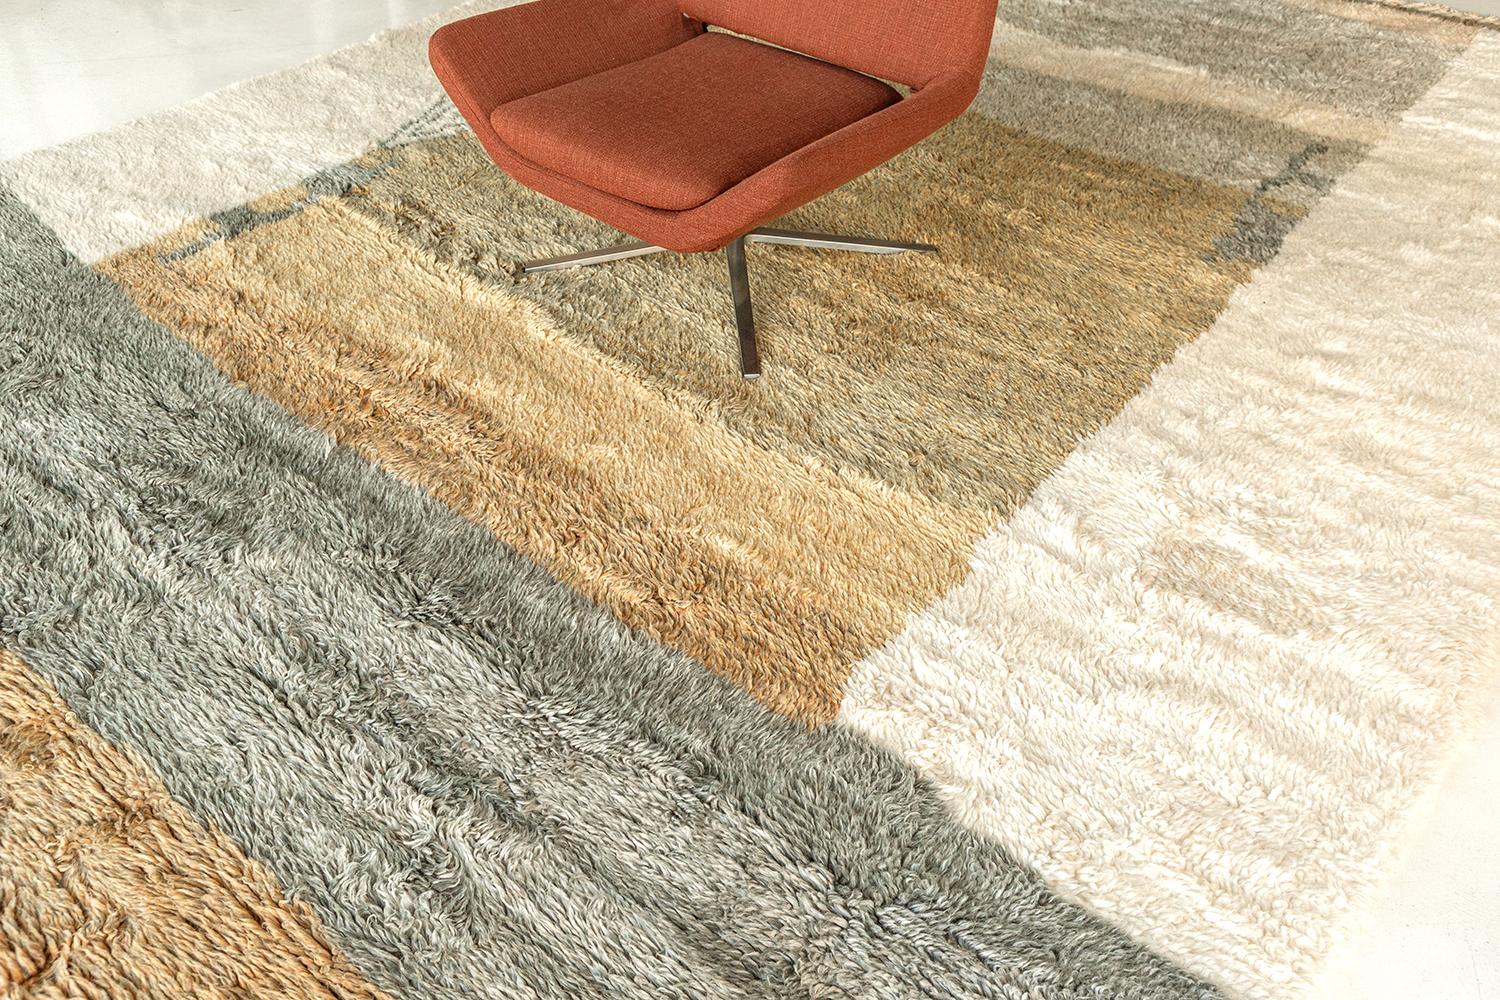 'Jorja' is a breathtaking rug inspired by the Atlas Mountains of Morocco. This magnificent rug features earth toned colors and irregular shapes and design elements work cohesively to make for a great contemporary interpretation for the modern design